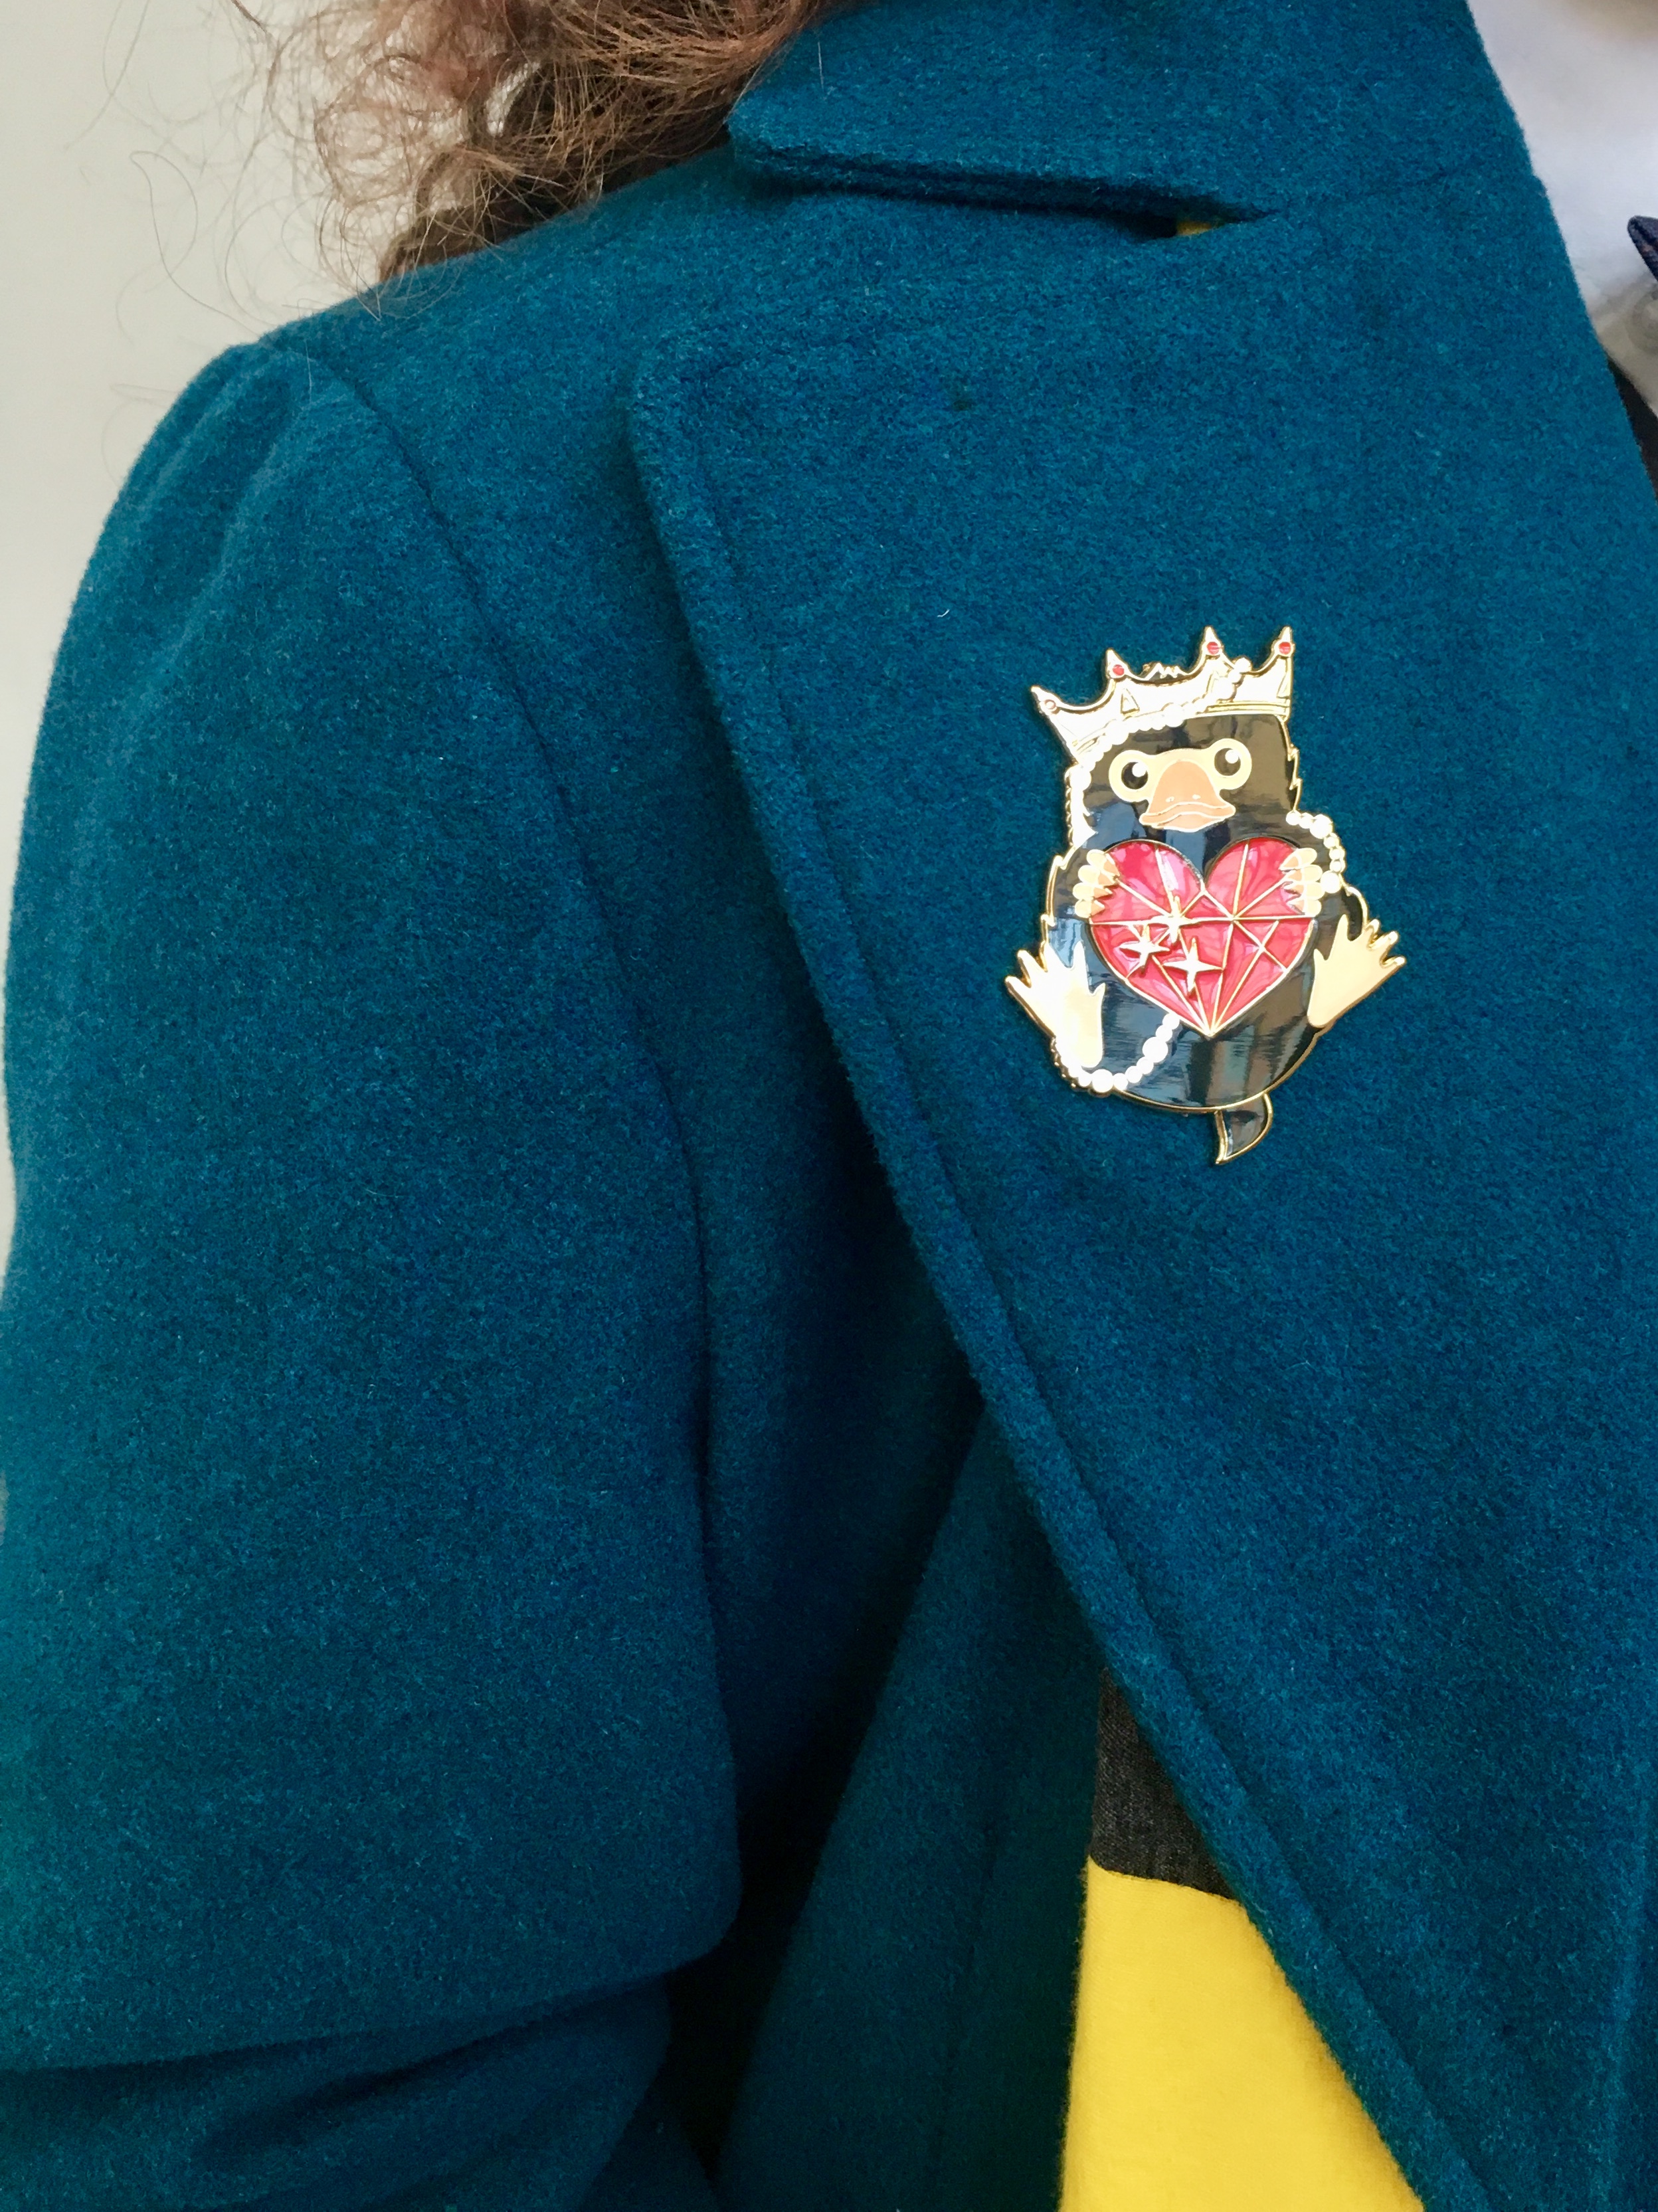 No, seriously; check out this pin. This Niffler has stolen my heart.